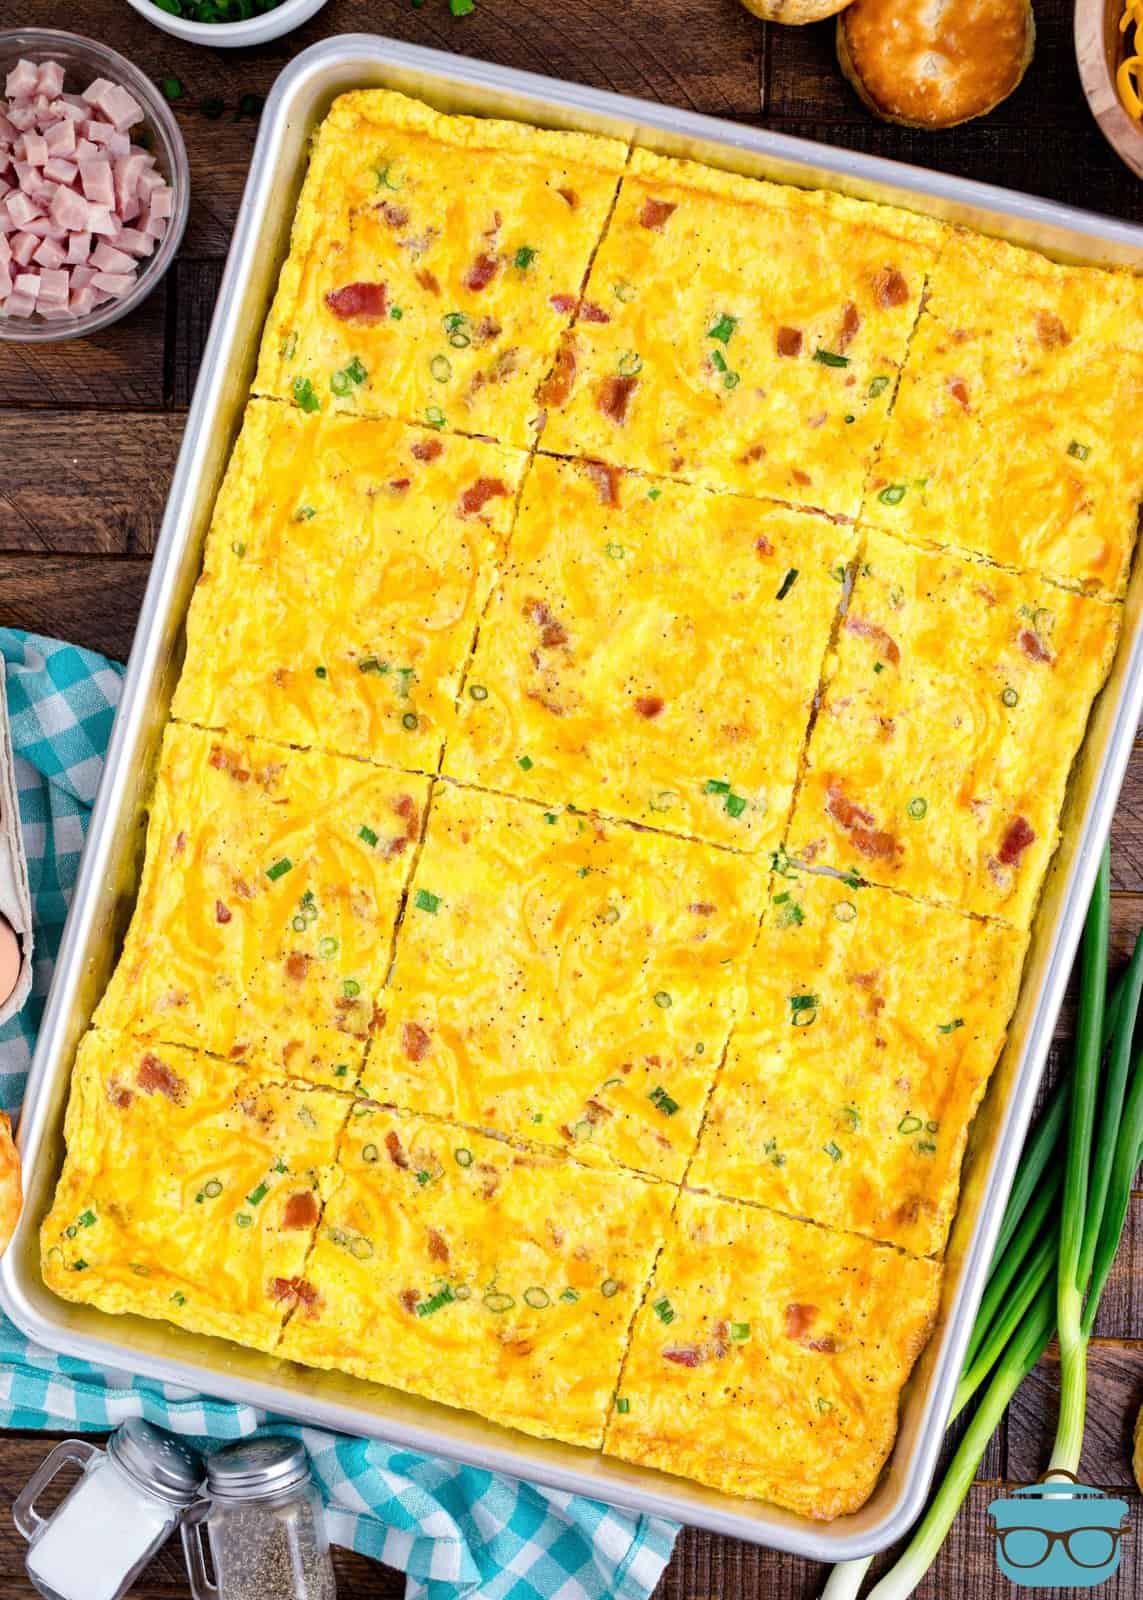 A sheet pan with baked eggs.